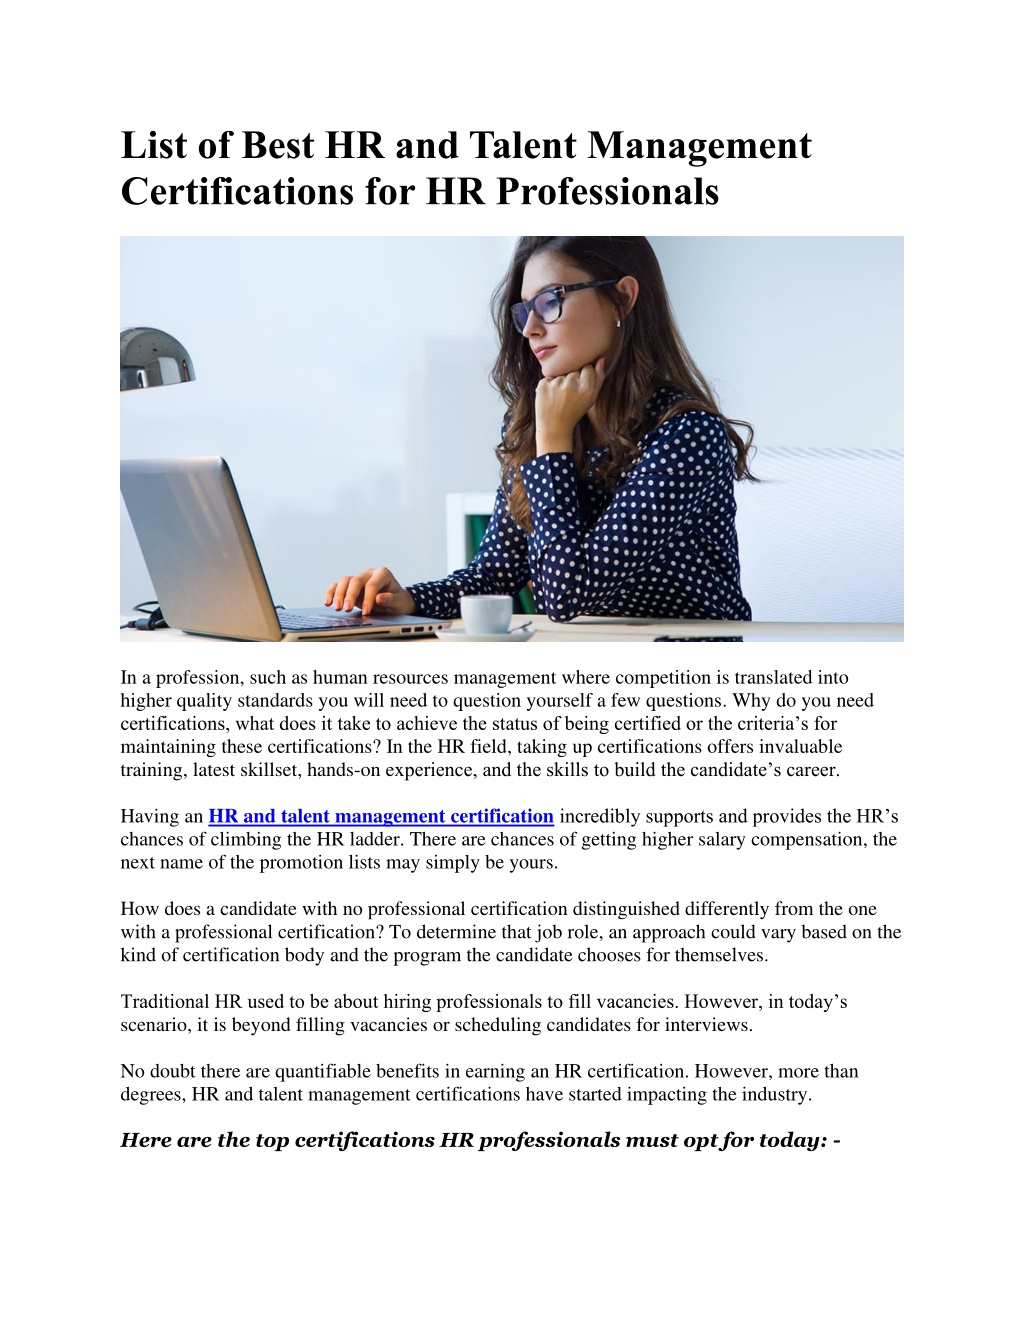 PPT List of Best HR and Talent Management Certifications for HR